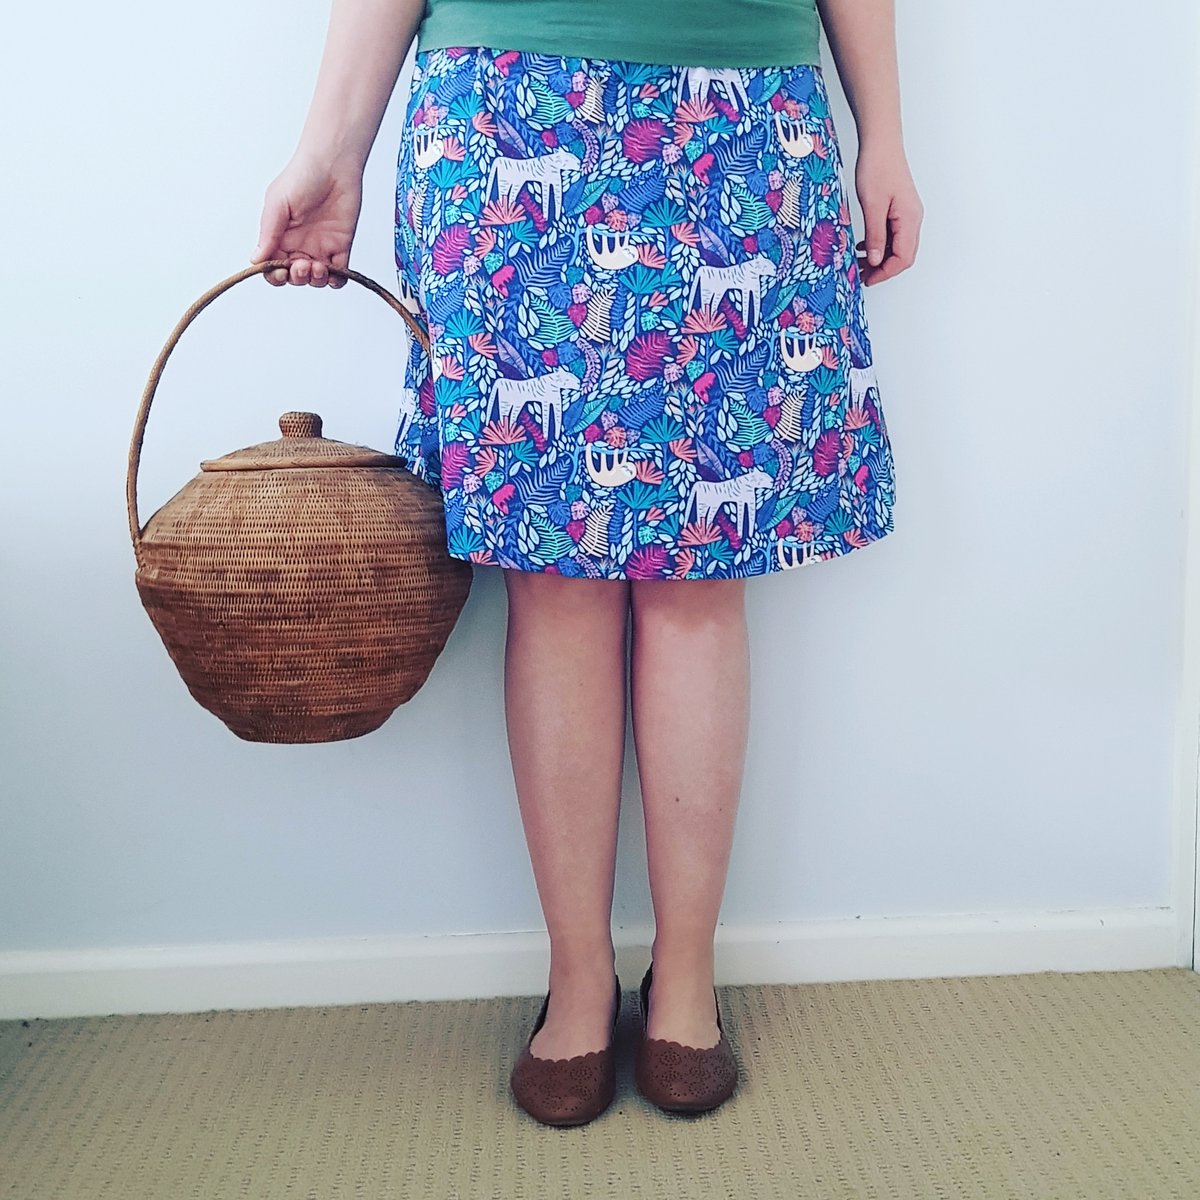 Image of Gus Skirt - Dashes *LAST ONE SIZE L*